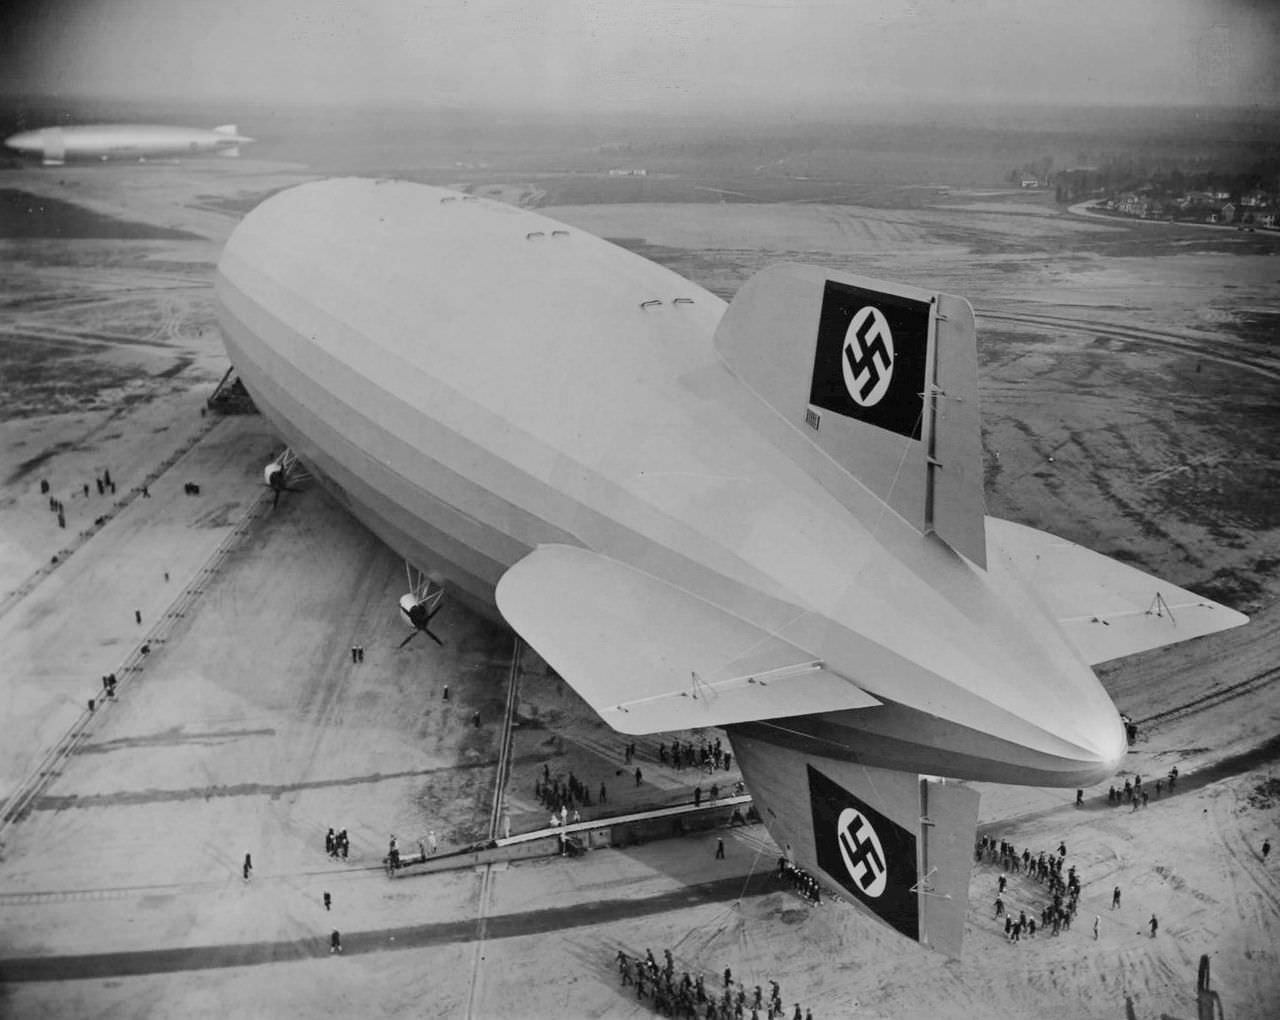 First landing of the Hindenburg in the US, May 9, 1936